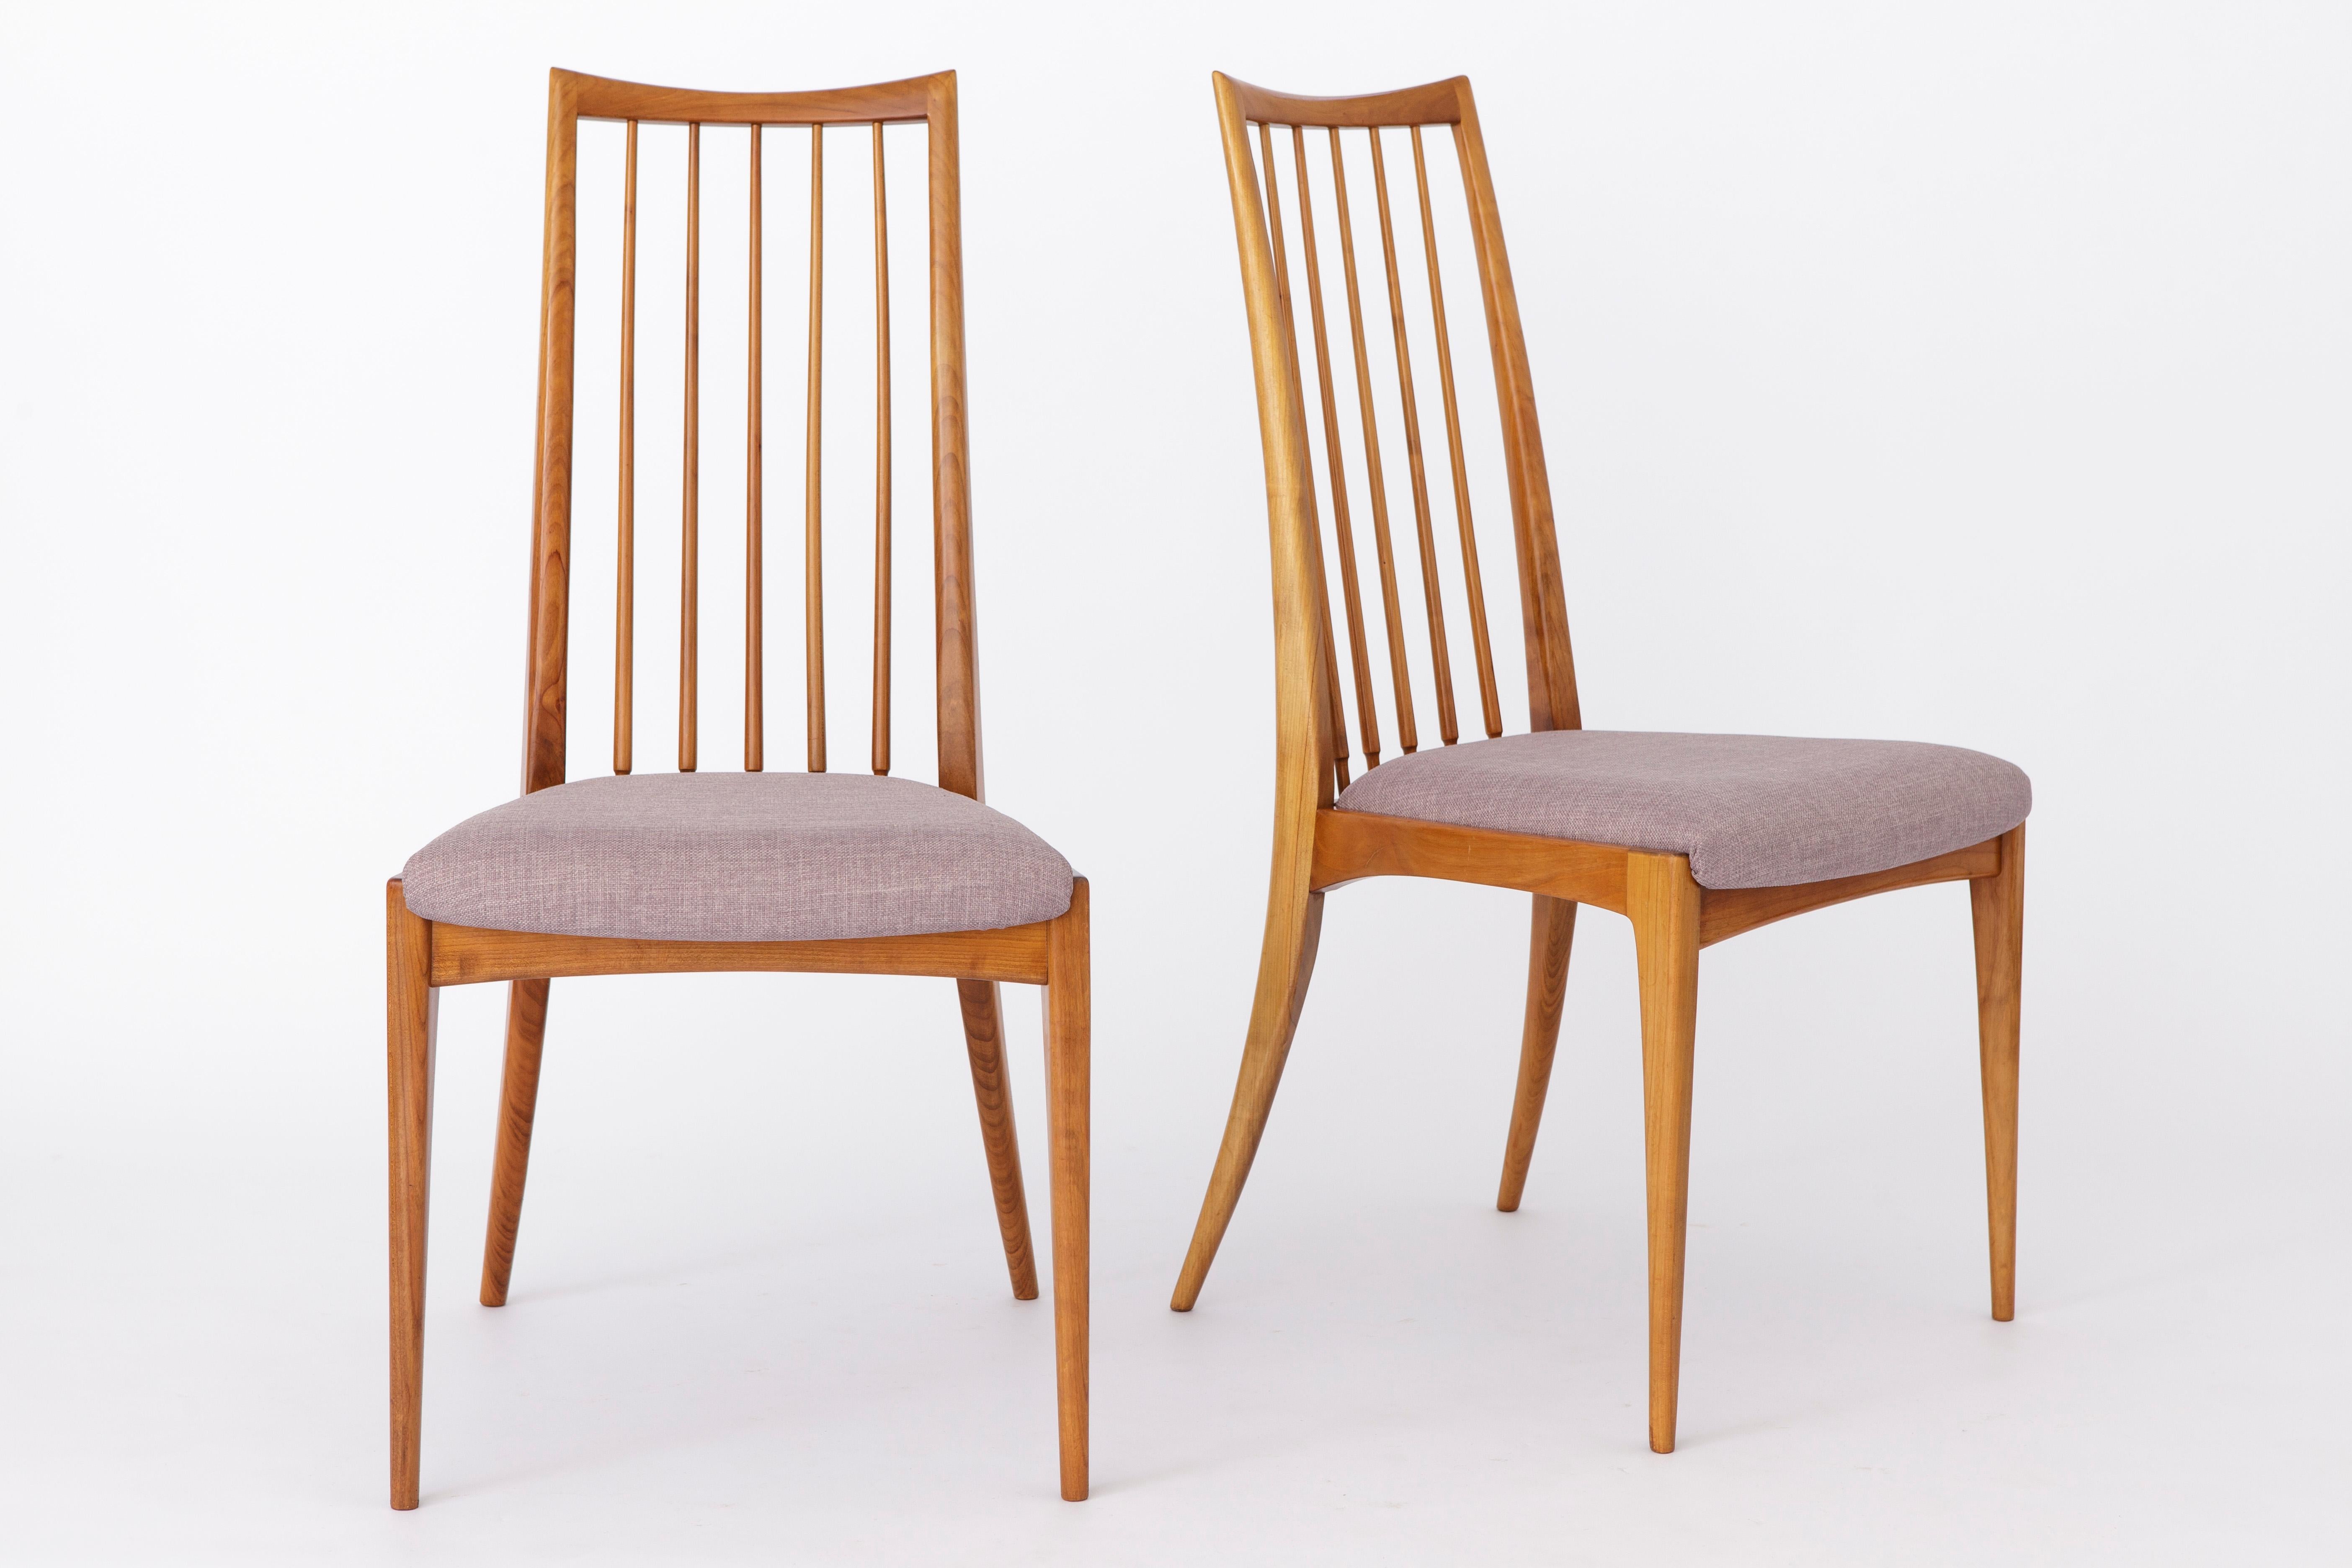 Pair of vintage chairs from German Origin. 
Dedicated designer: Ernst Martin Dettinger
Production period: approx. 1960s. 

Sturdy wooden frames. Refurbished and oiled. 
Wood sort most likely pear or cherry wood. 
Seats reupholstered with purple